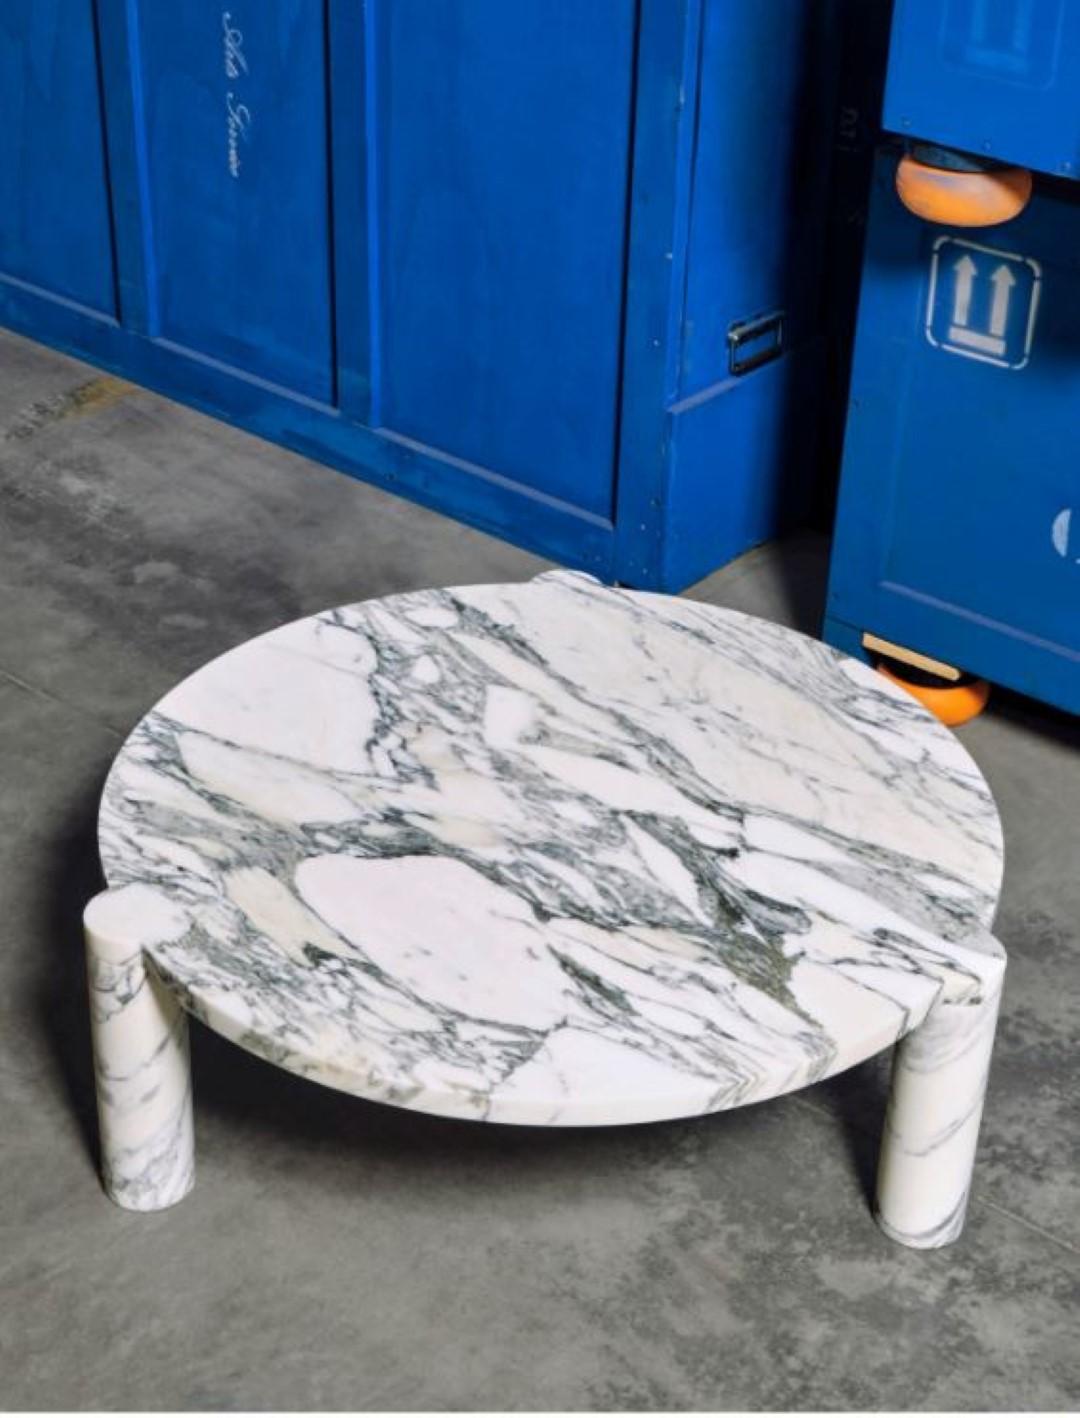 Alexis 90 Coffee table by Agglomerati
Dimensions: Ø 90 x H 33 cm.
Materials: Arabescato Marble.
Available in other stones. 

Alexis Coffee Table has off-set, cylindrical legs that curve flush underneath the tabletop, providing a soft release and